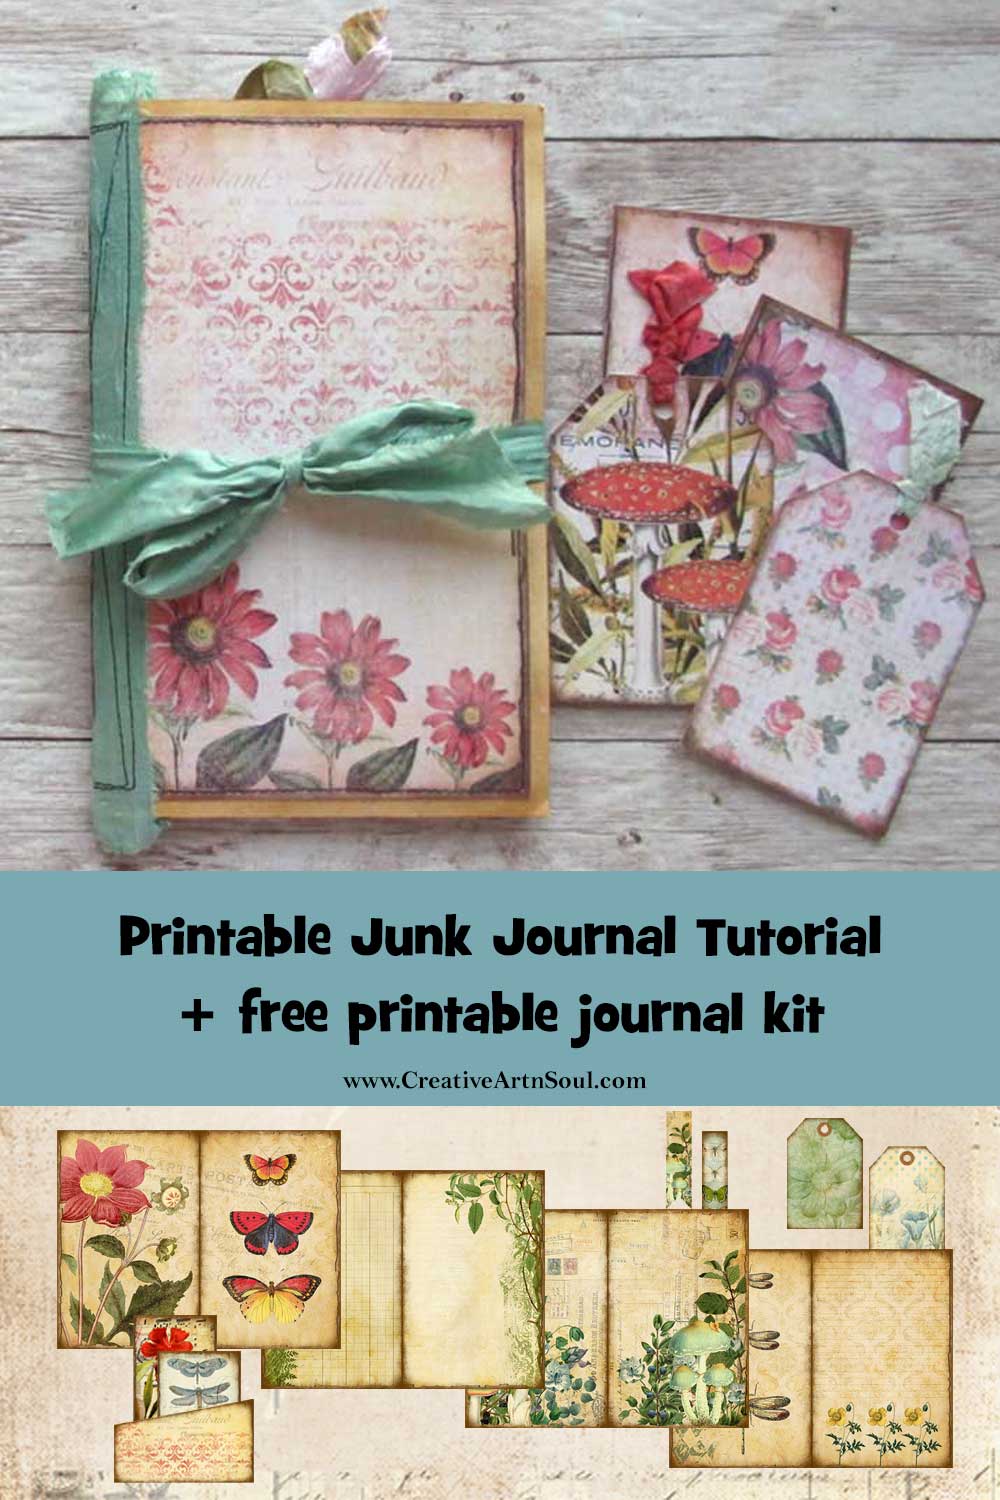 How to Make a Printable Junk Journal